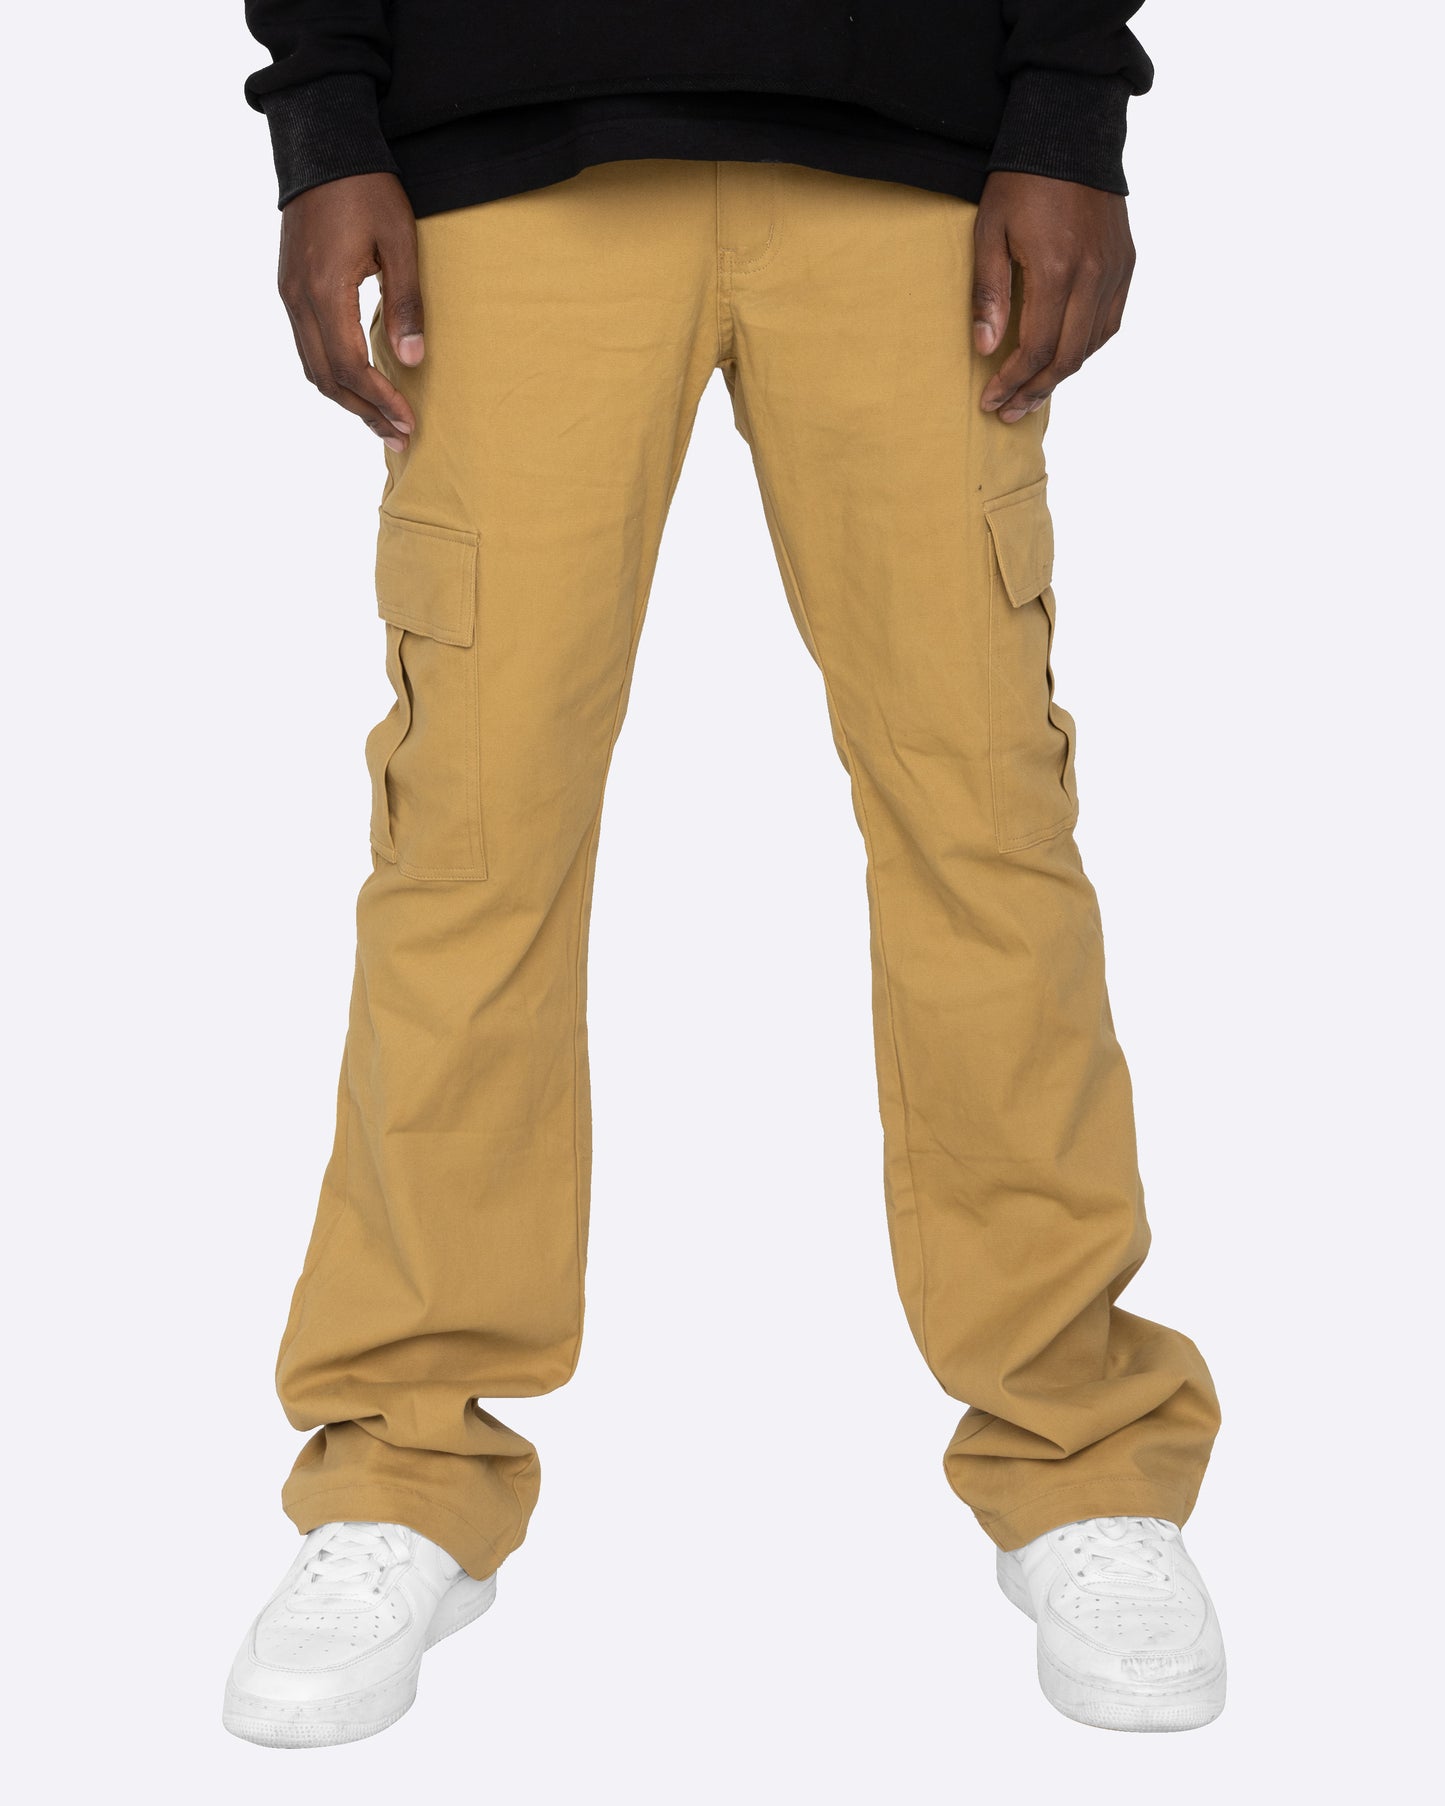 Long Pants For Men MenS Fashion Classic Twill Relaxed Fit Work Wear Combat  Safety Cargo Pants Khaki Xlac1591 